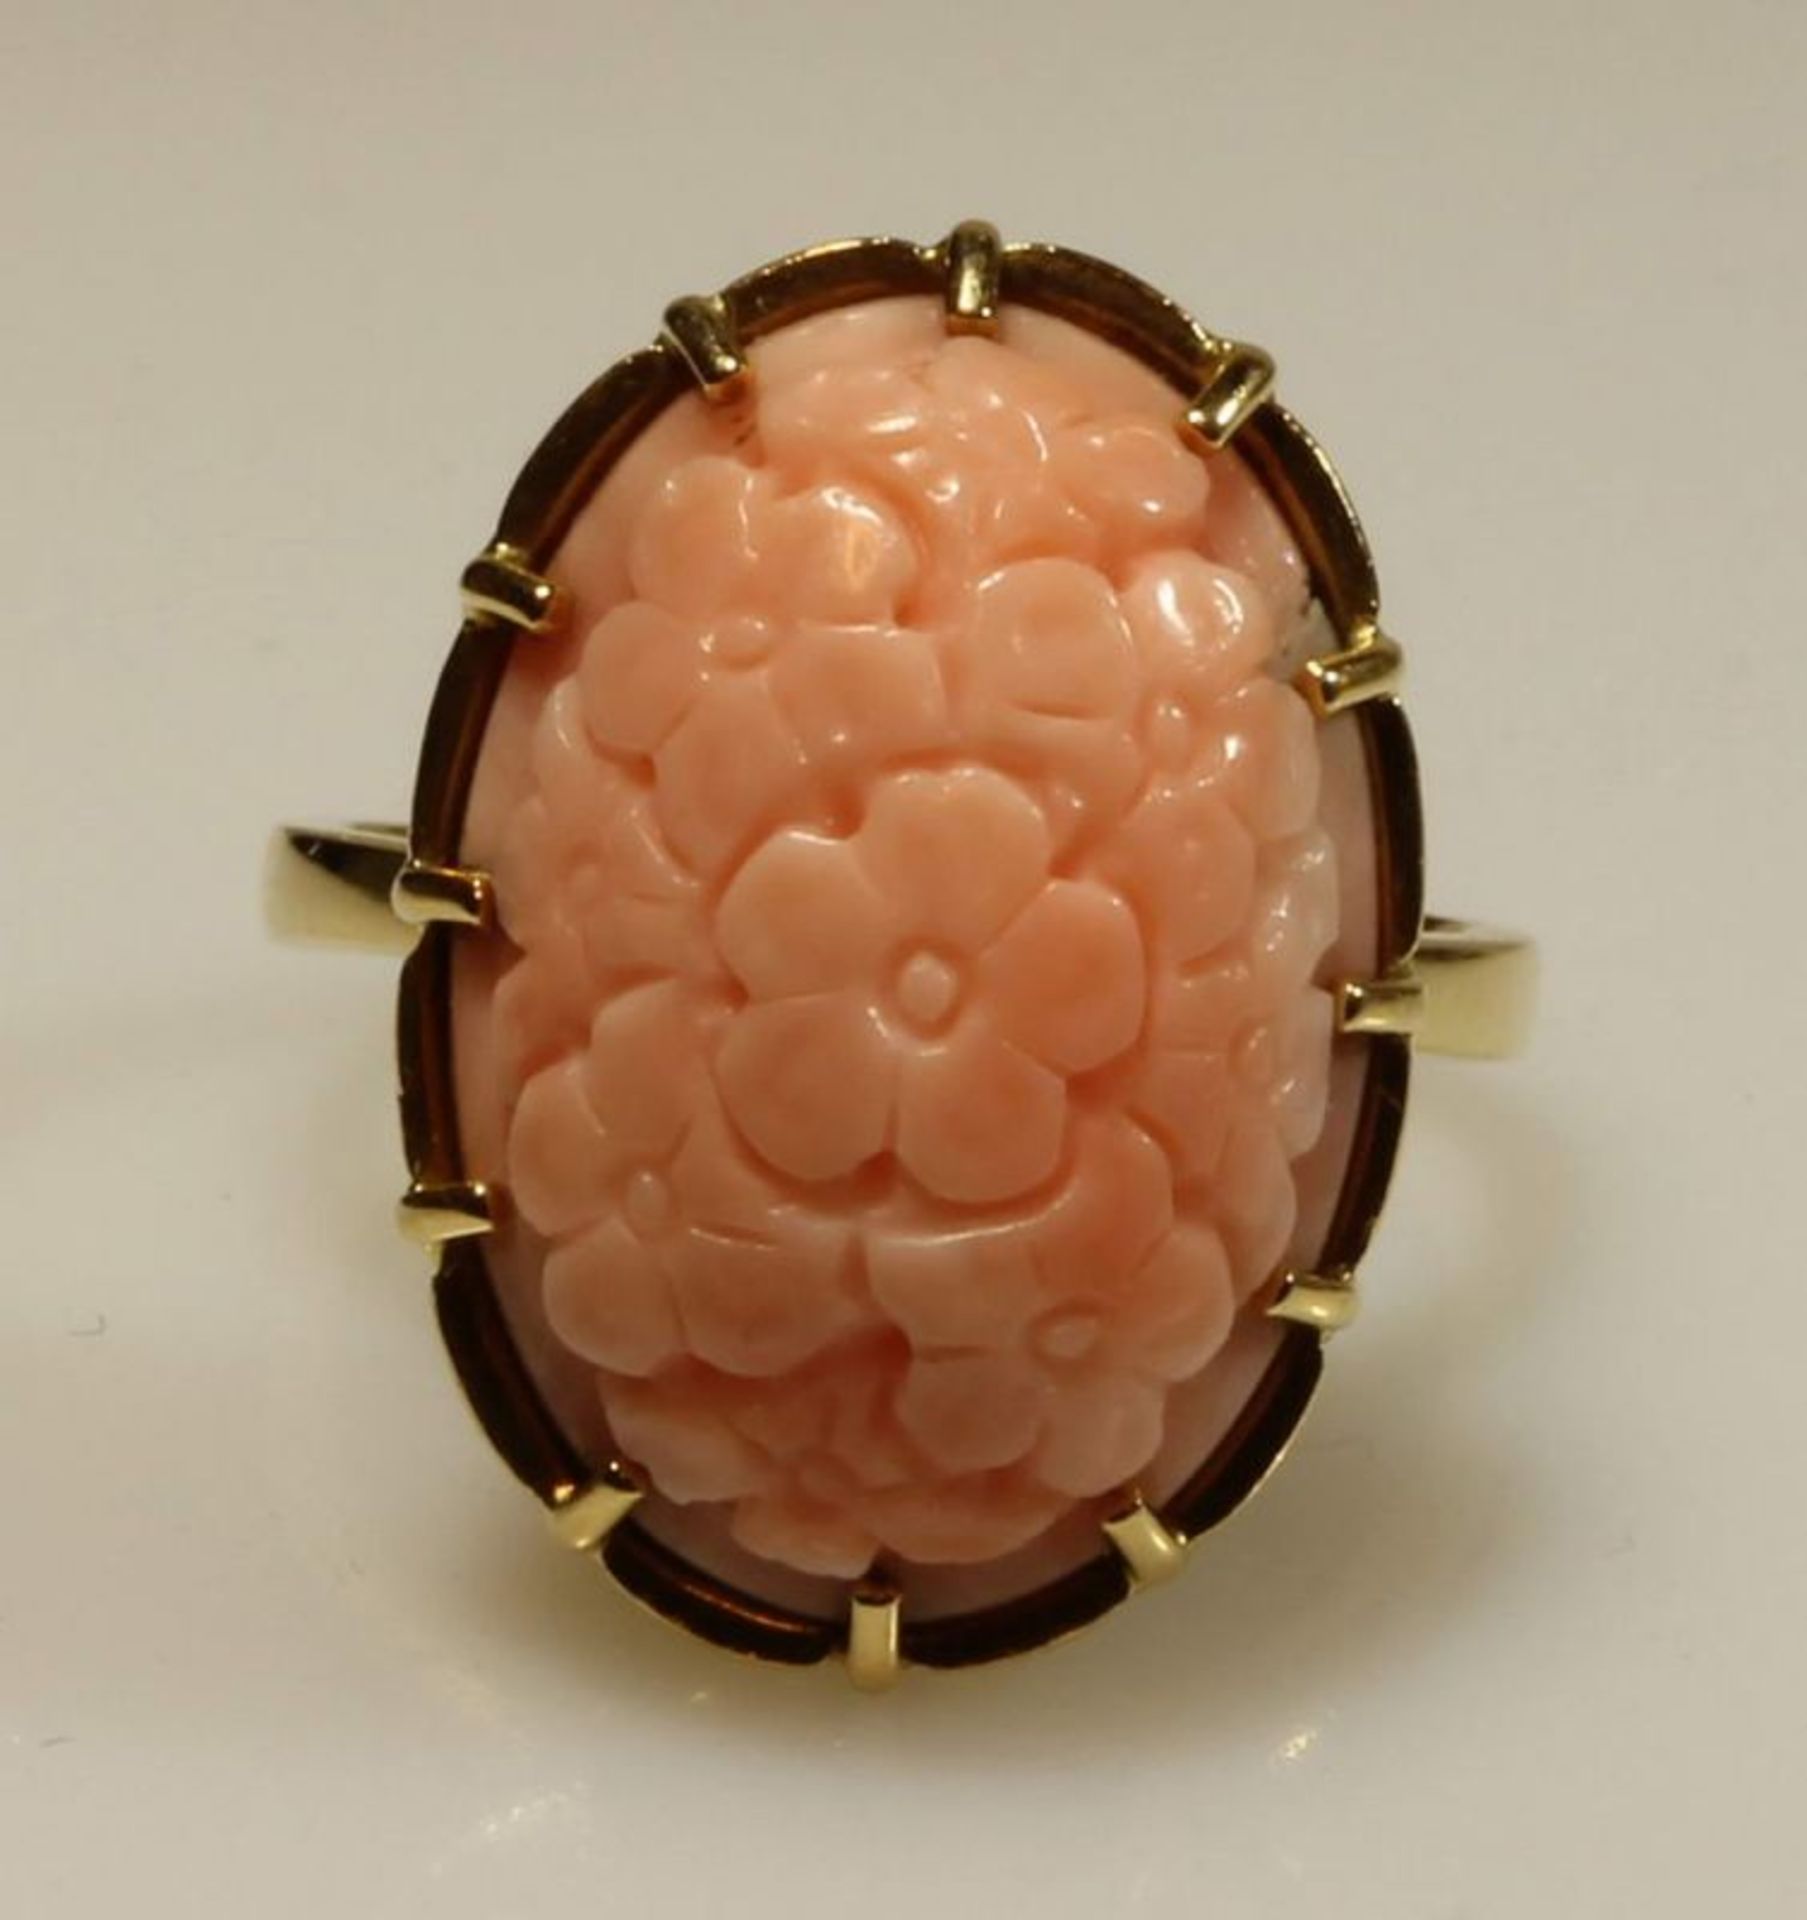 Ring, GG 750, floral geschnitzter Korall-Cabochon, 8 g, RM 16 20.00 % buyer's premium on the